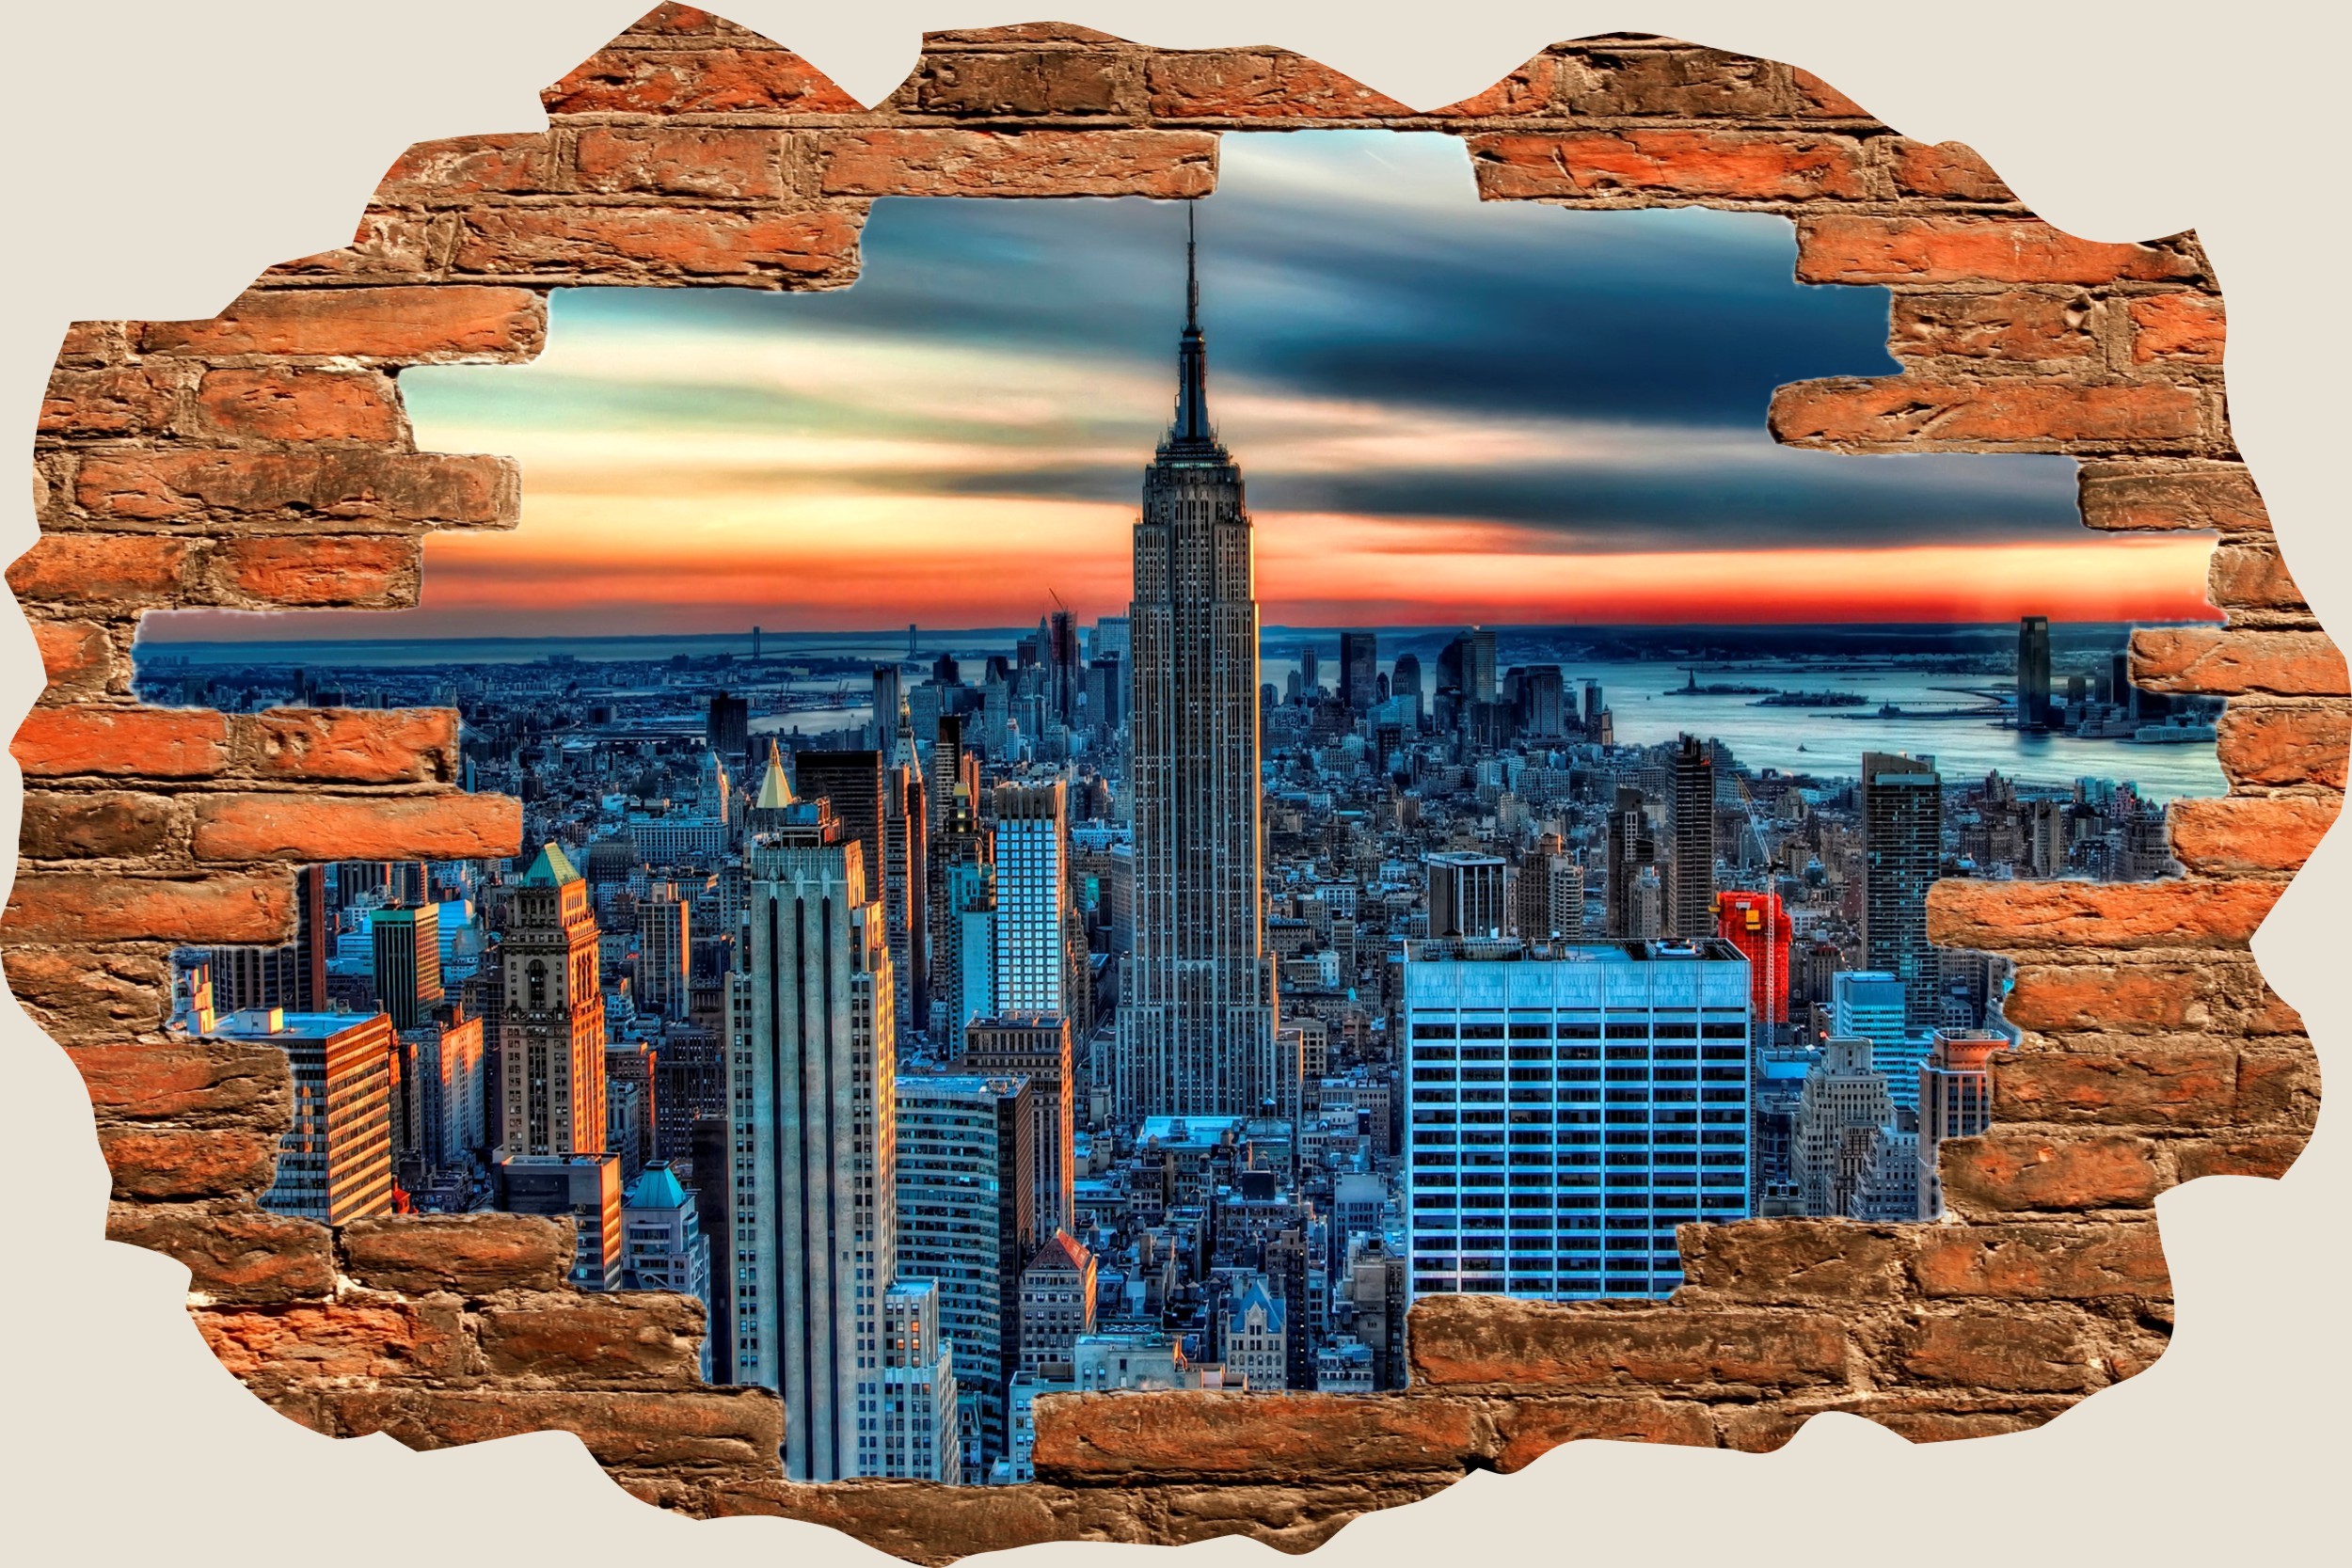 2500x1667 Details about 3D Hole in Wall New York City View Wall Stickers Film Mural  Art Wallpaper 334